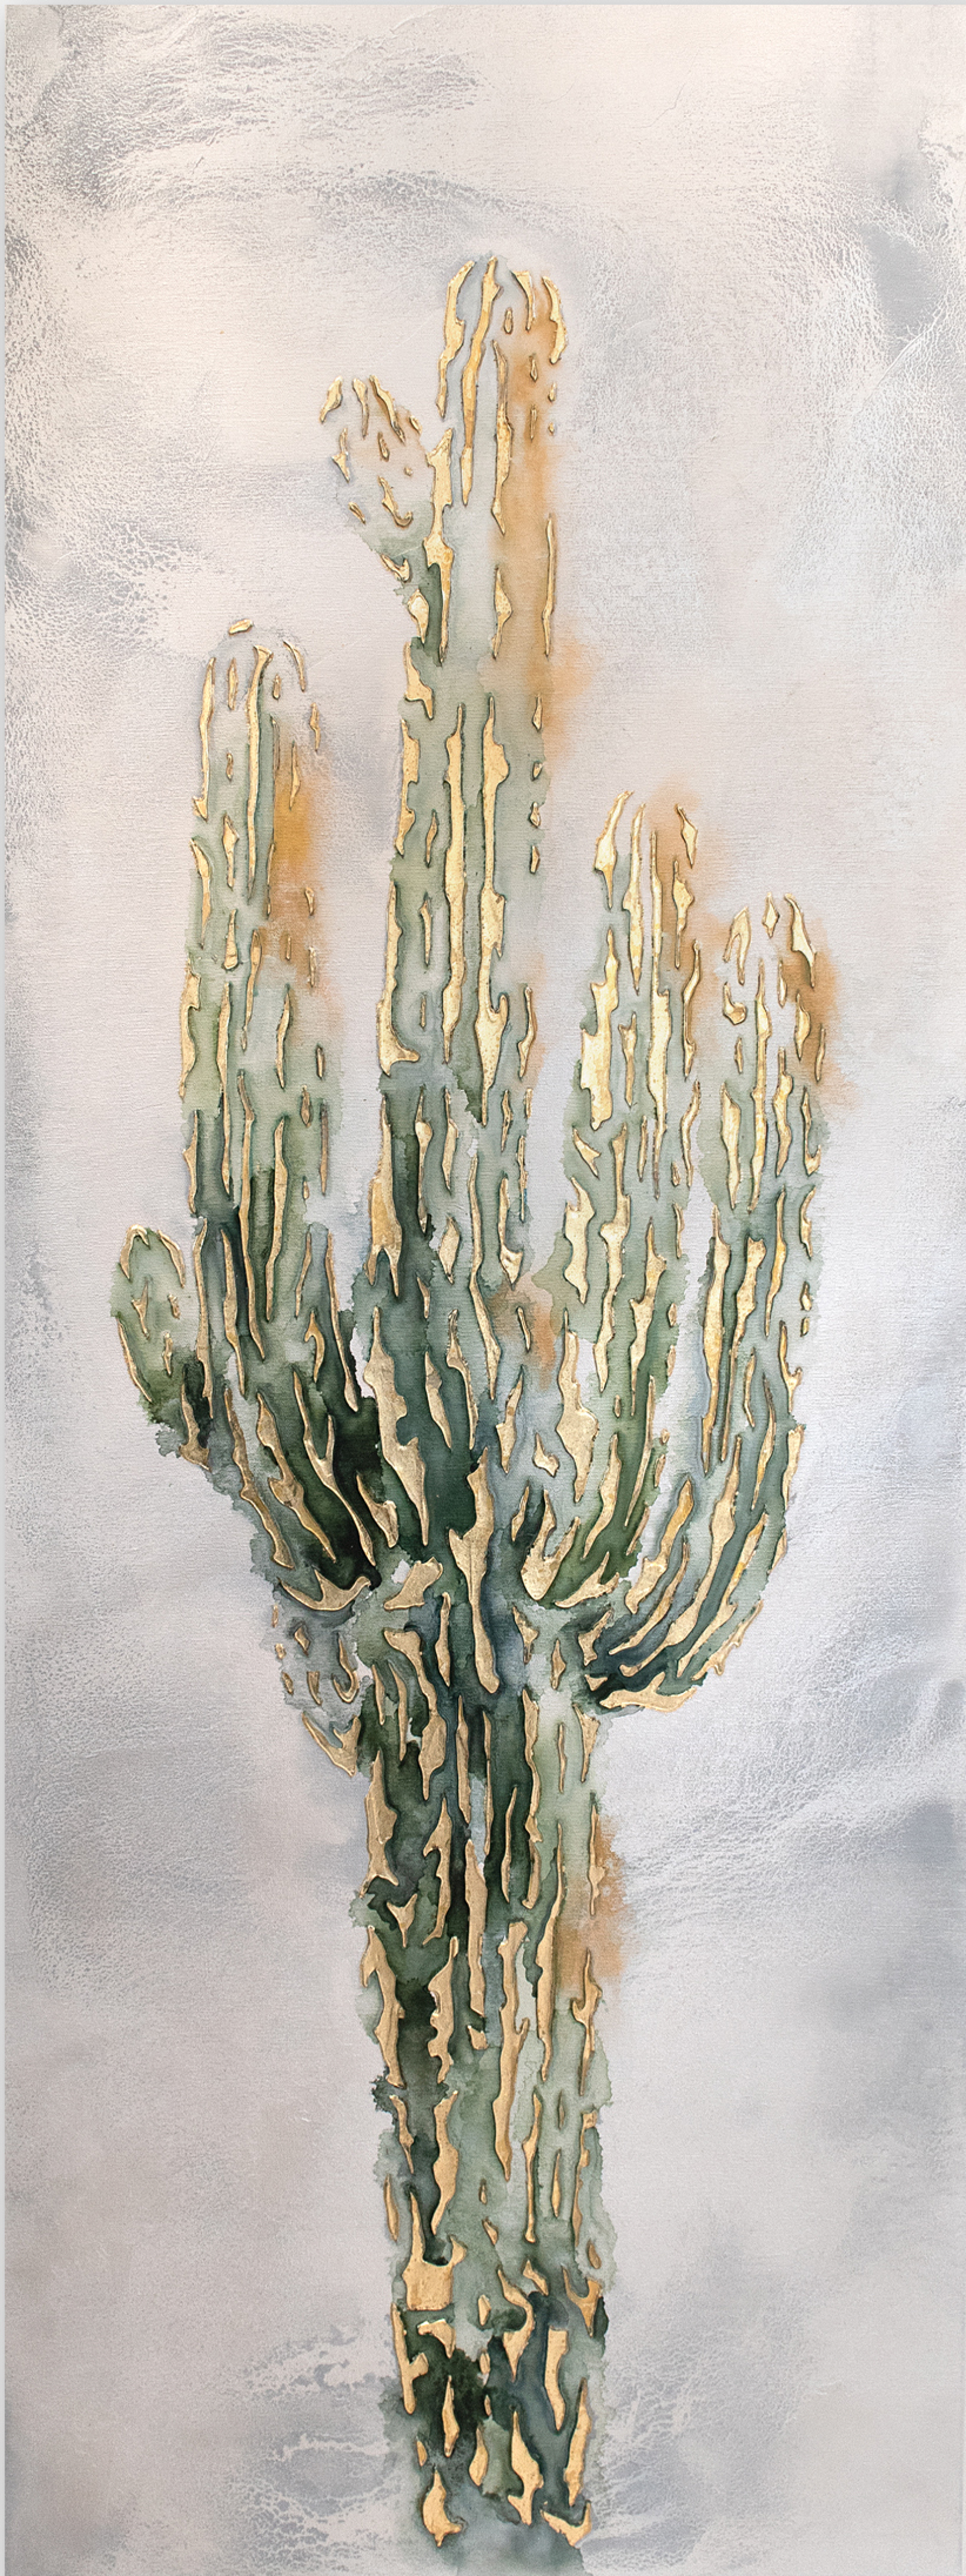 Gilded Saguaro I by Leah Rei